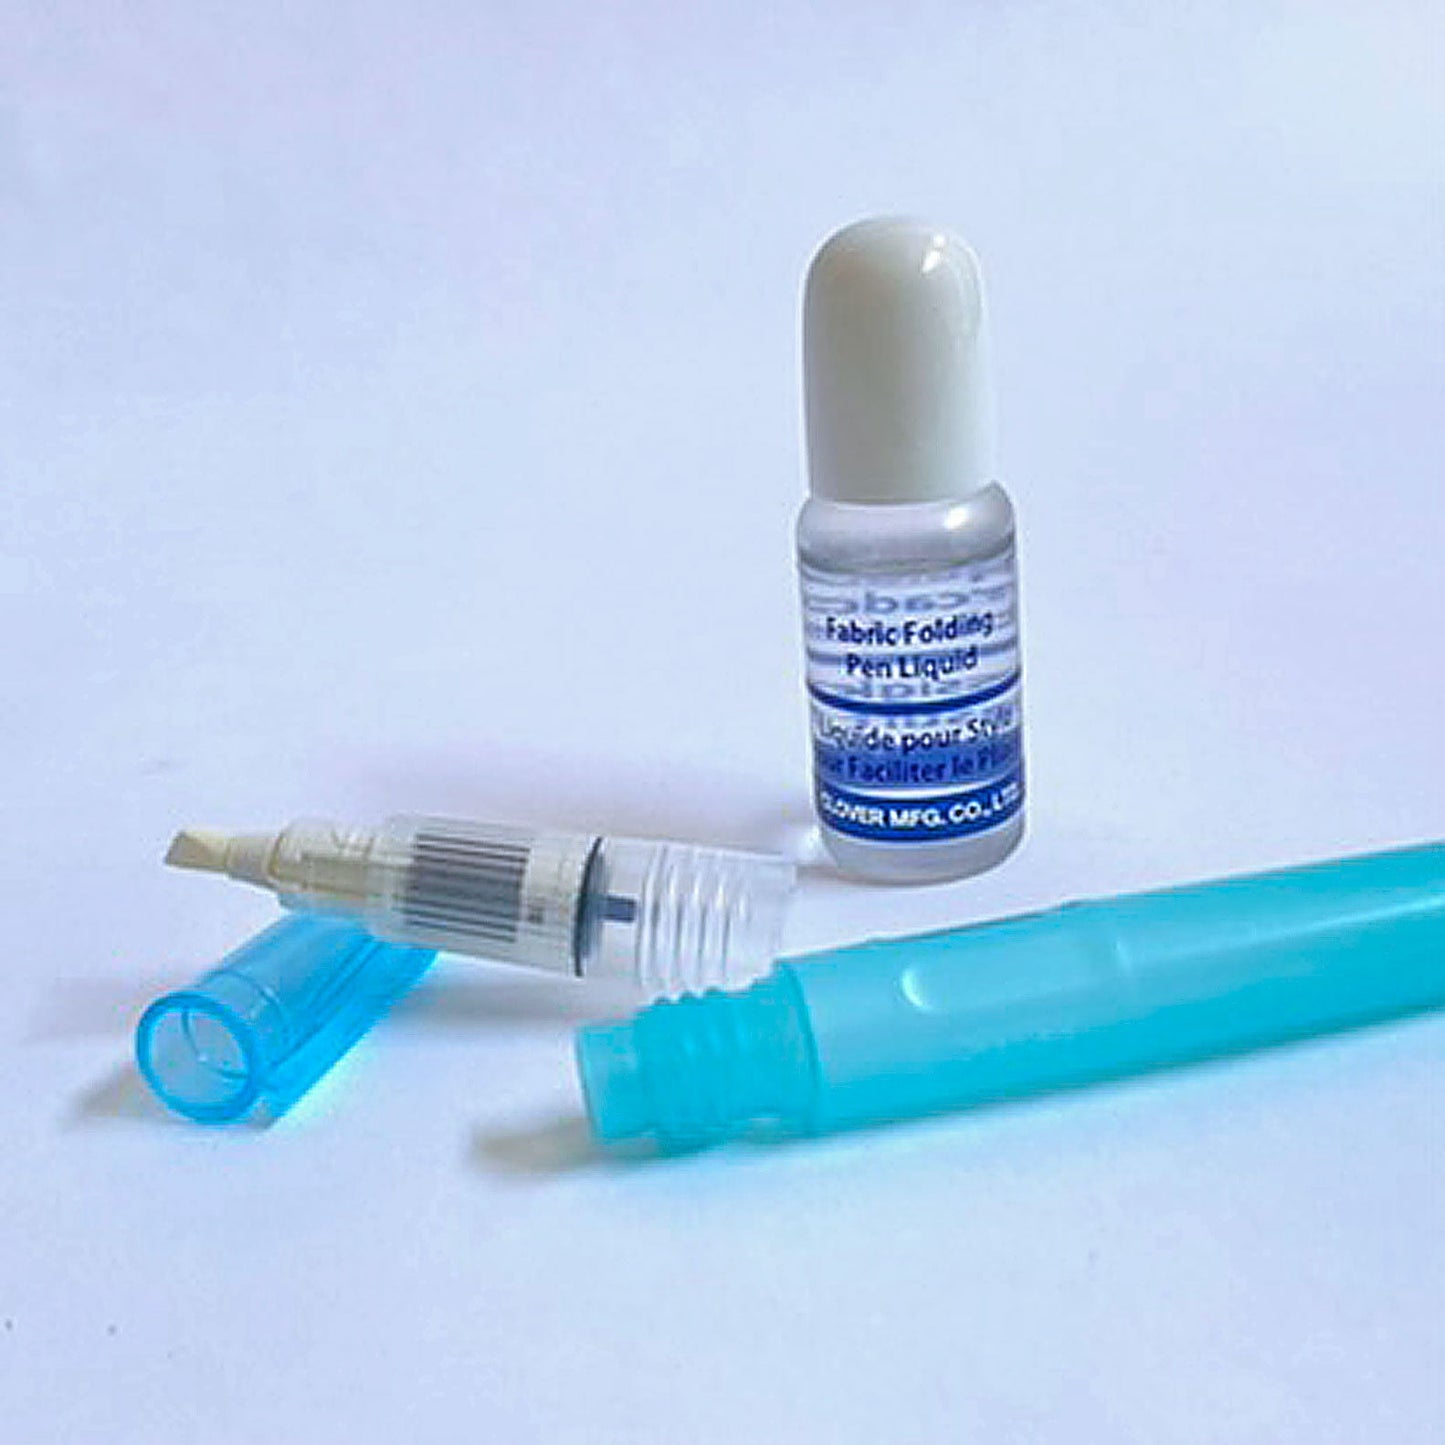 The Fabric Folding Pen by Clover with special applicator tip comes with a small bottle of solution. The applicator tip detaches from the base for adding 4-5 drops of solution plus water and then dispenses the diluted solution making fabric easier to fold. Use for finger pressing seams, English paper piecing, foundation or paper piecing, and more.